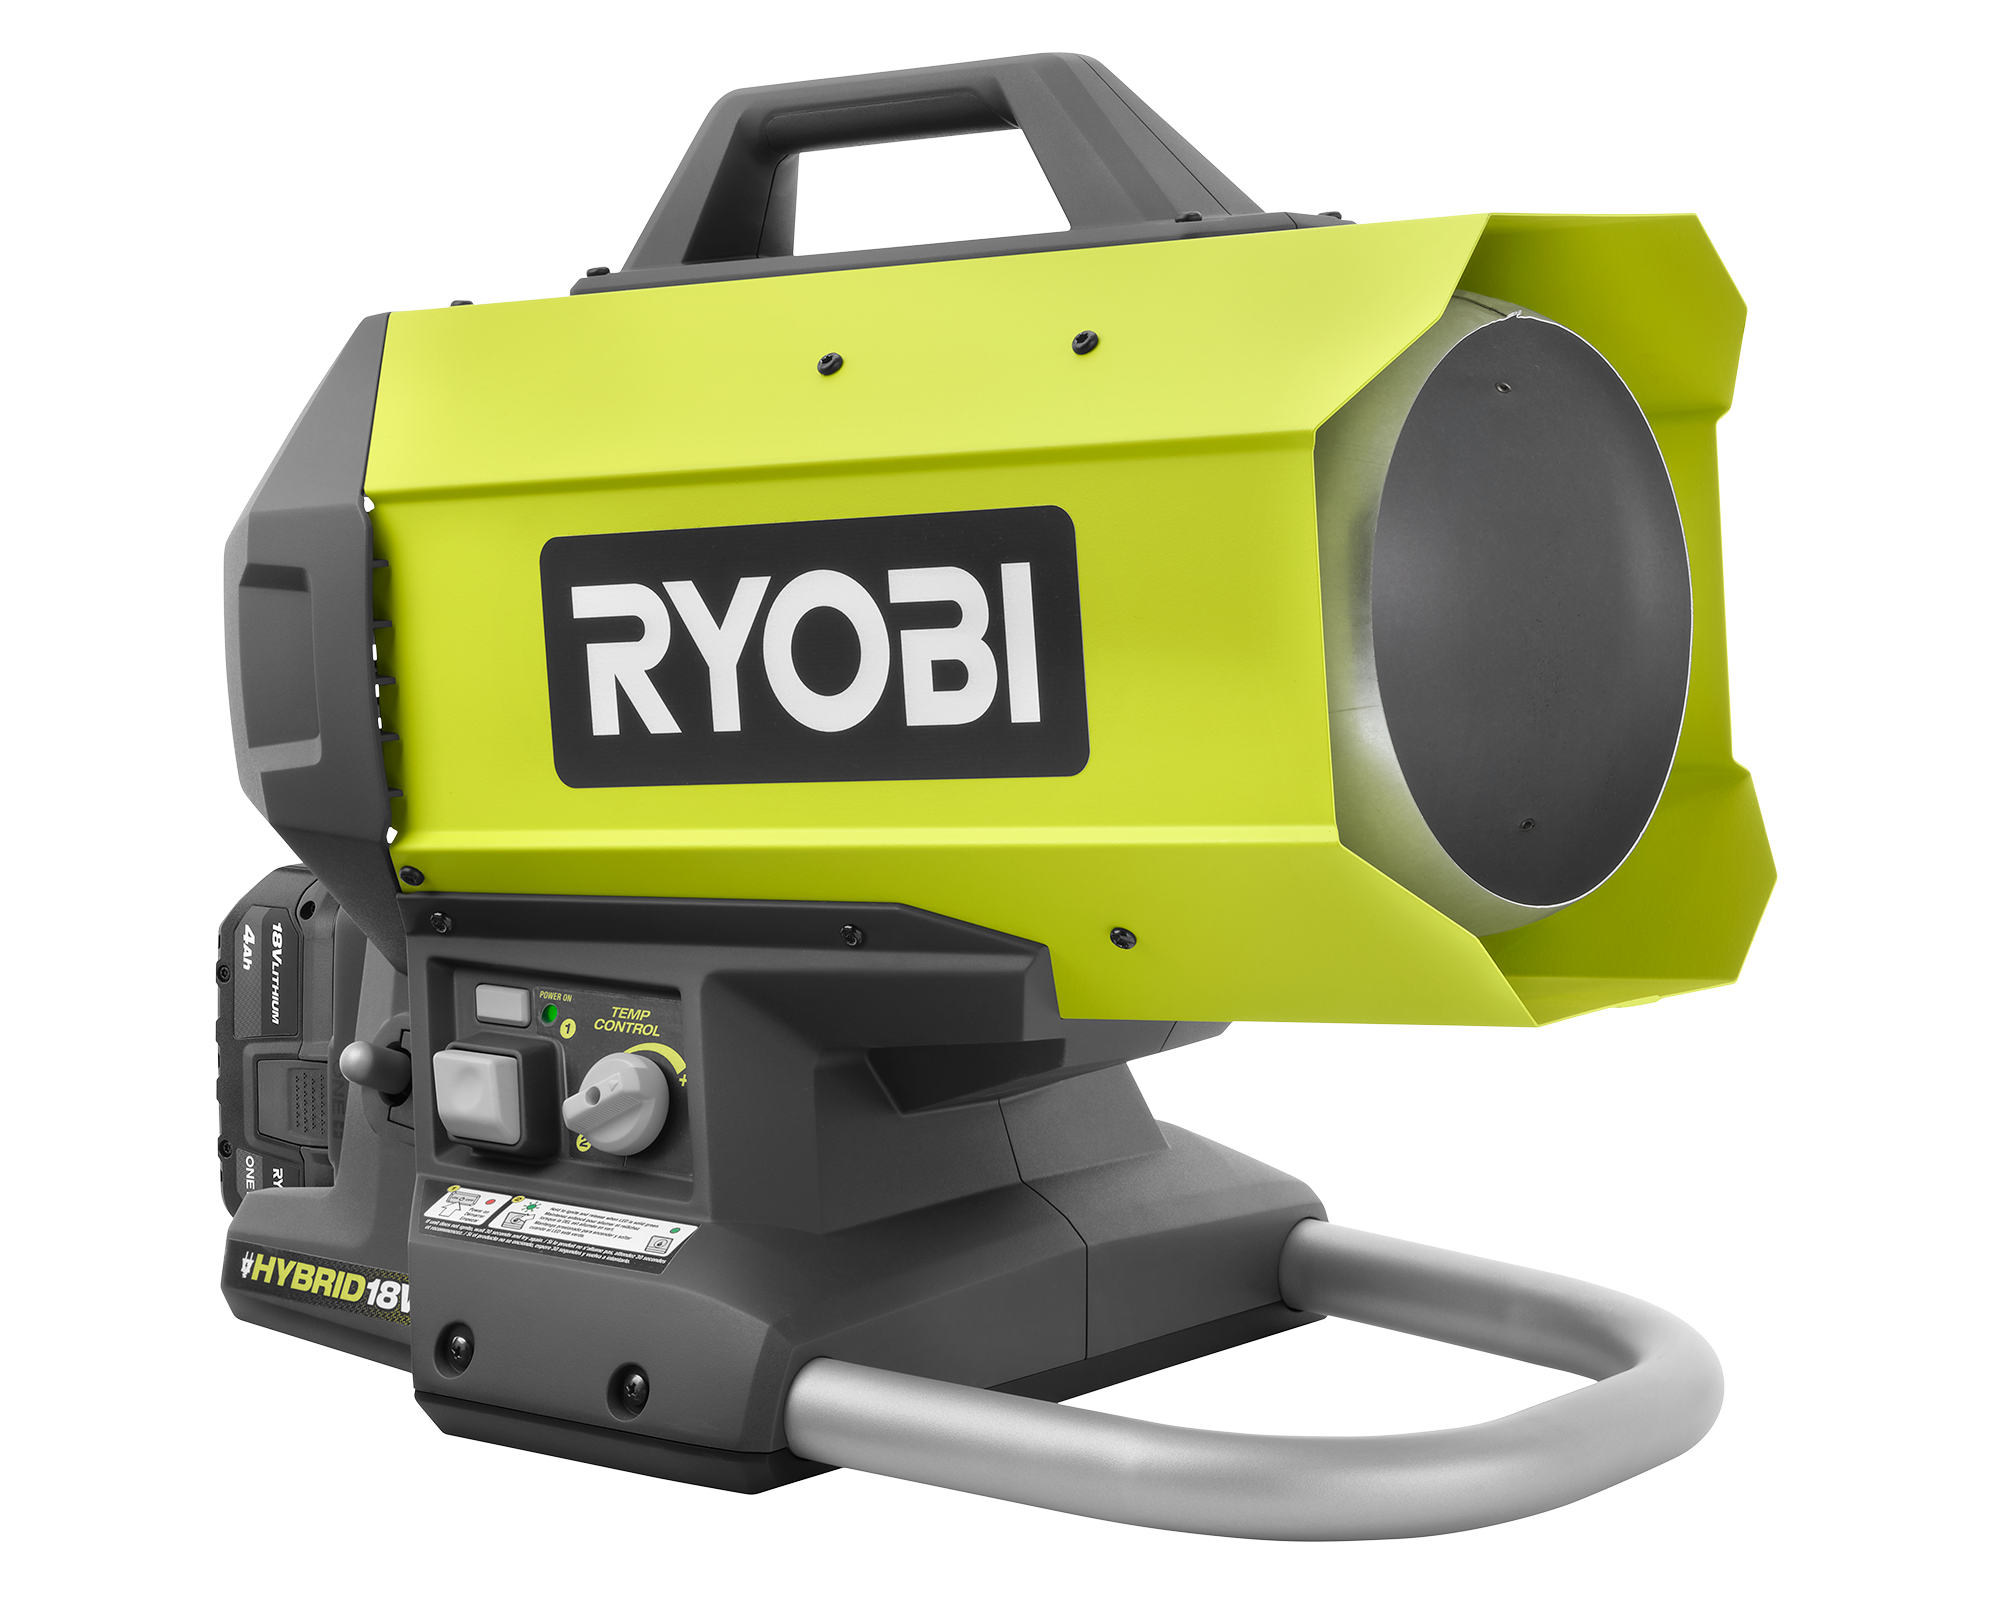 Ryobi 18-Volt ONE+ 15K BTU Hybrid Forced Air Propane Heater P3180, MN HOME  OUTLET BURNSVILLE #132 - SATURDAY PICK UP ONLY! 10:00AM - 2:00PM NO  EXCEPTIONS!!!!